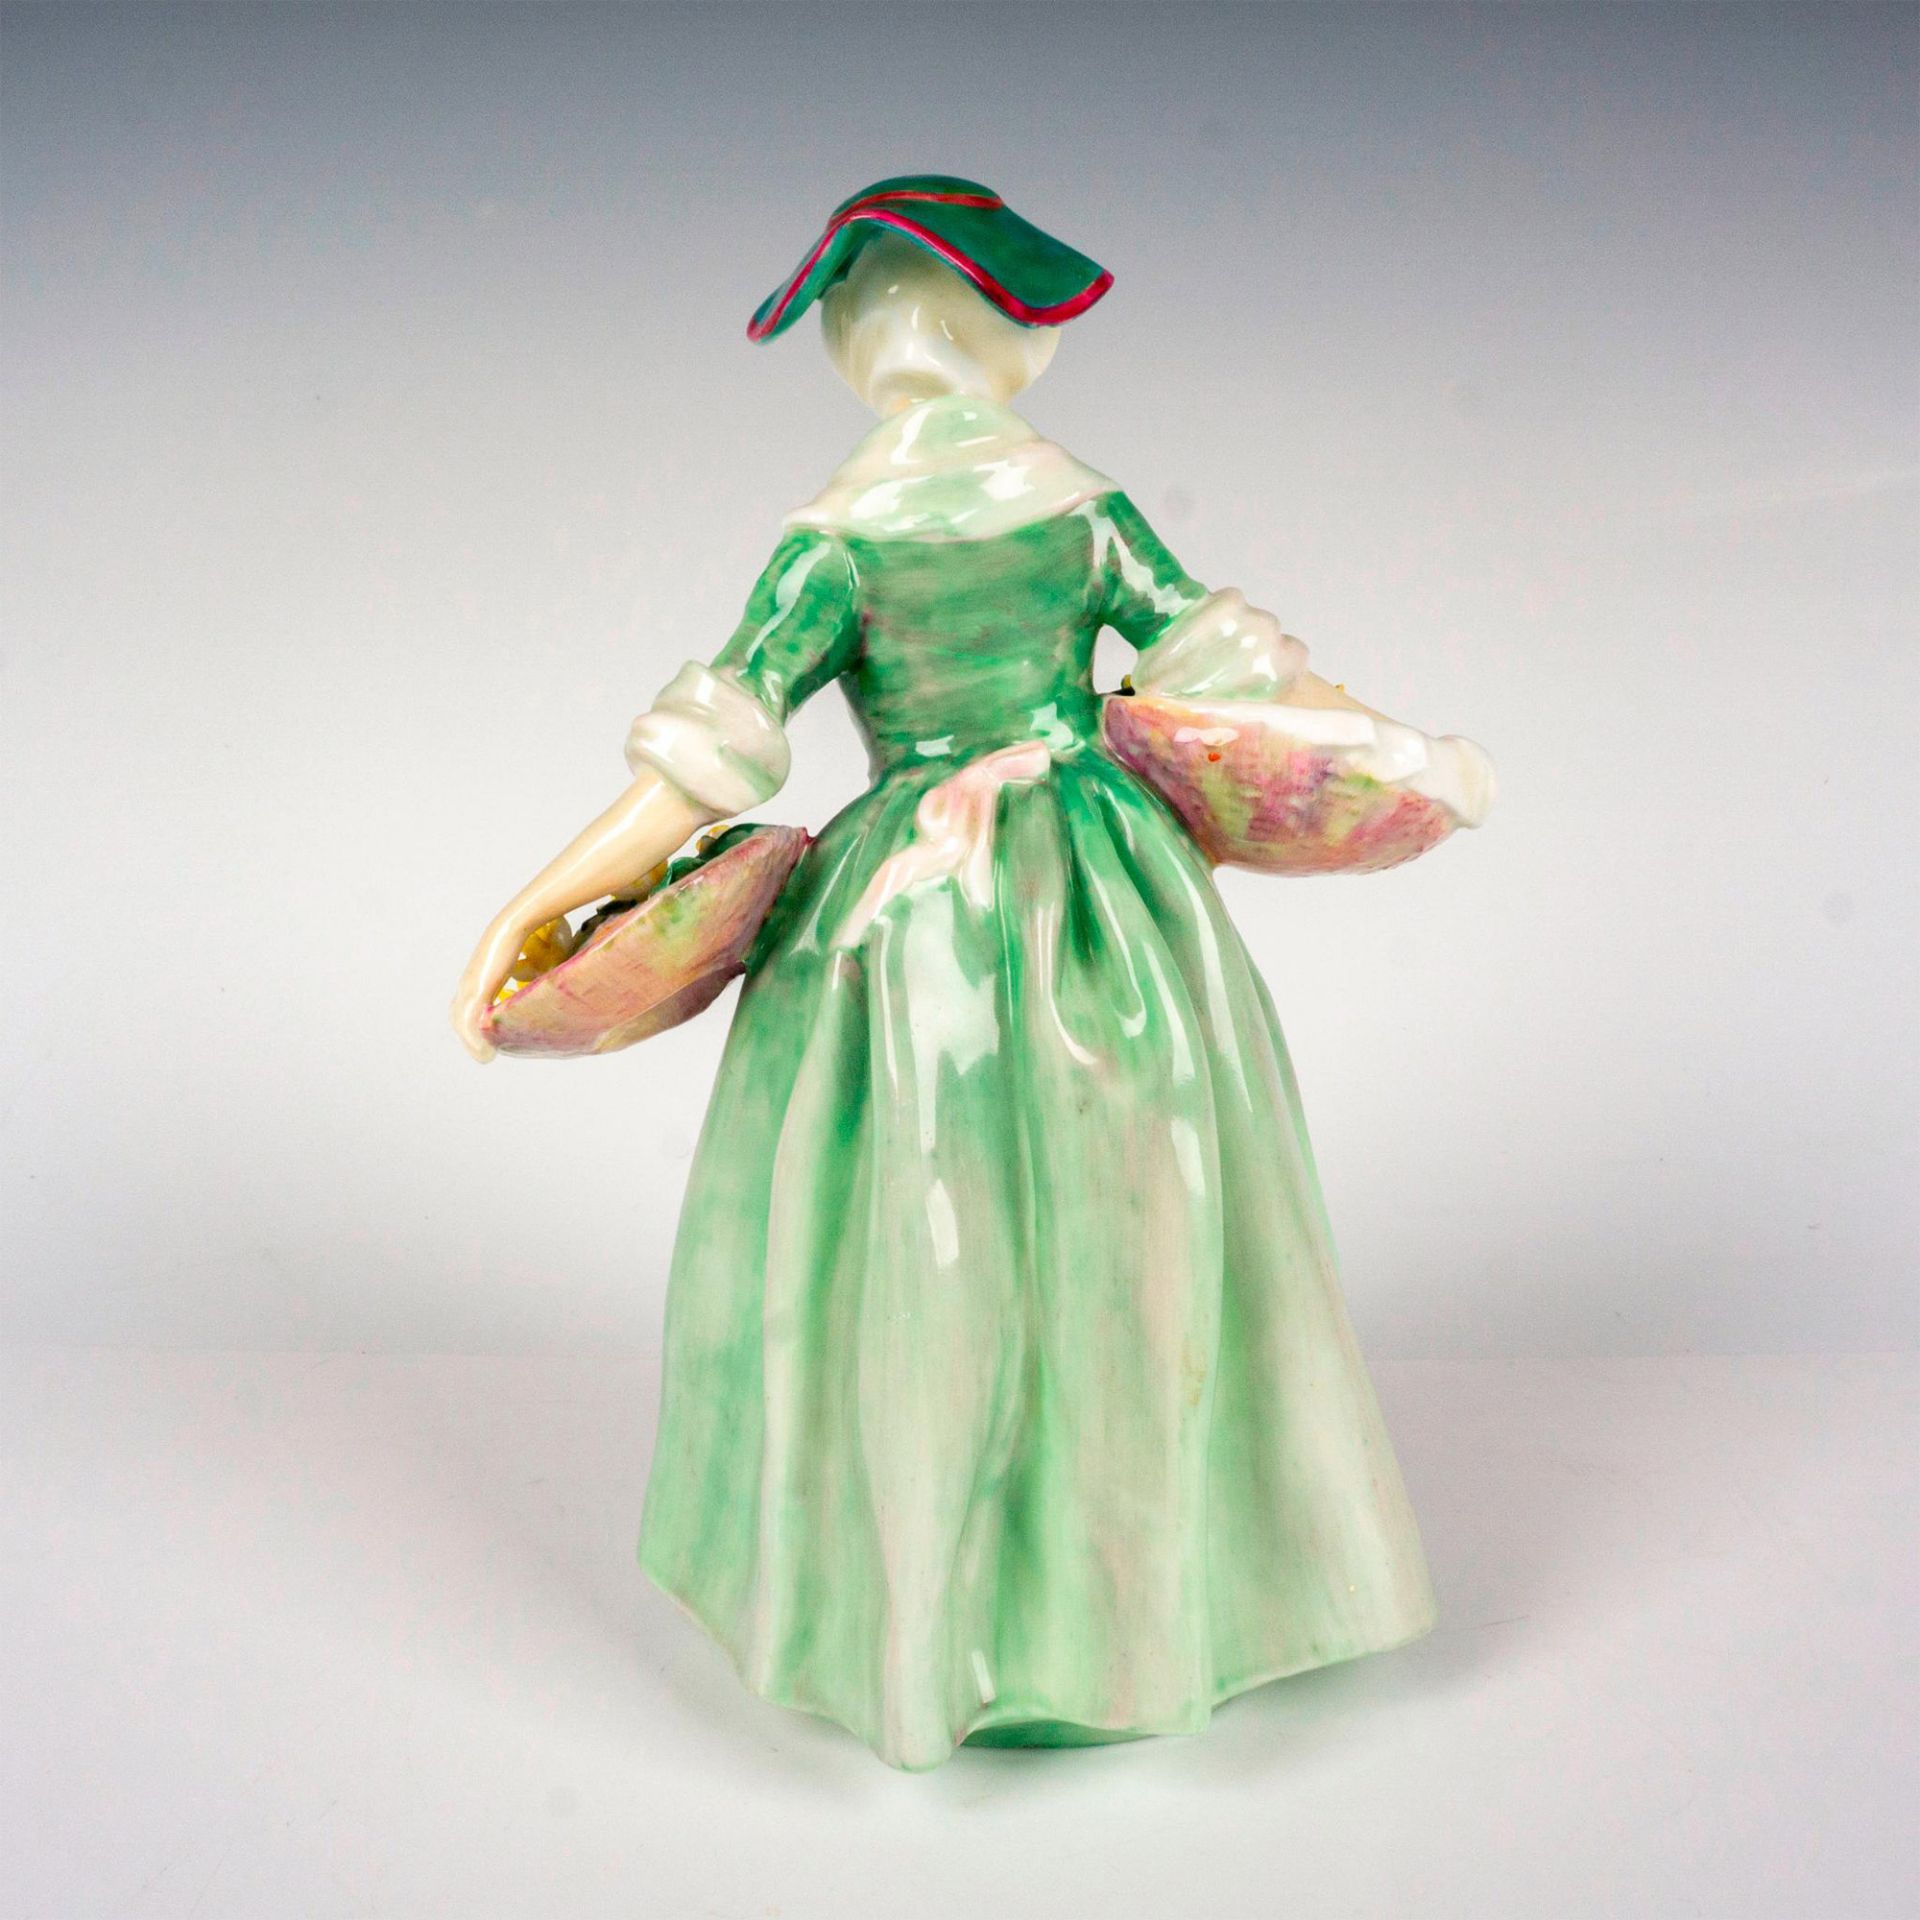 Daffy Down Dilly HN1712 Colorway - Royal Doulton Figurine - Image 2 of 3